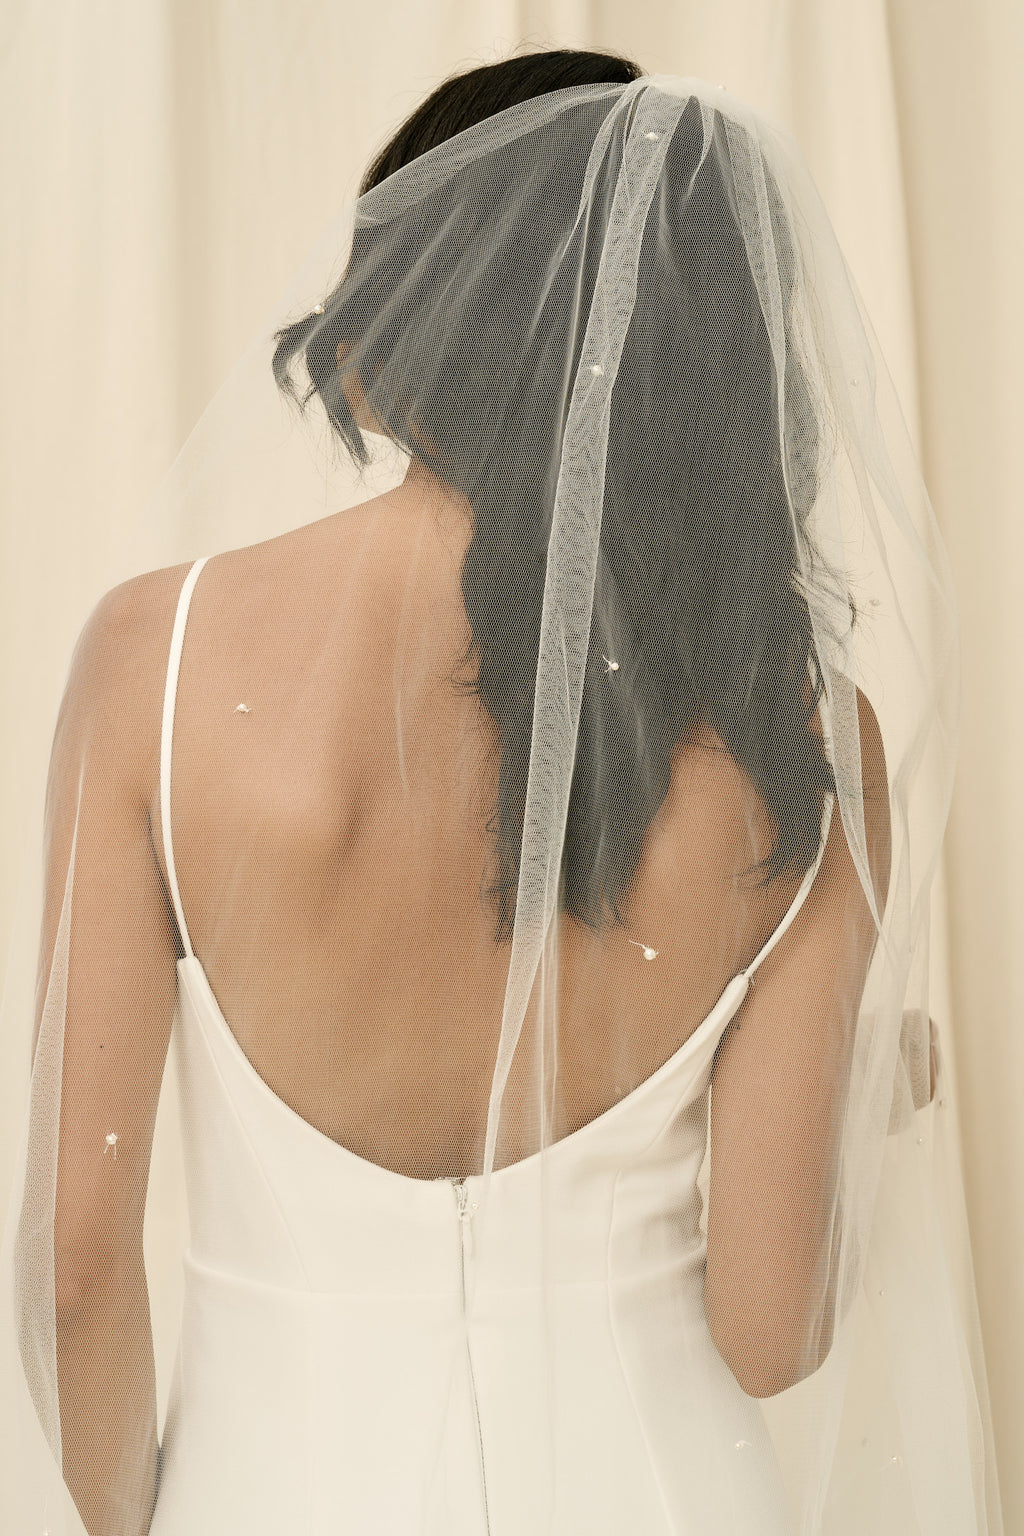 Bridal veils in Vancouver and Calgary